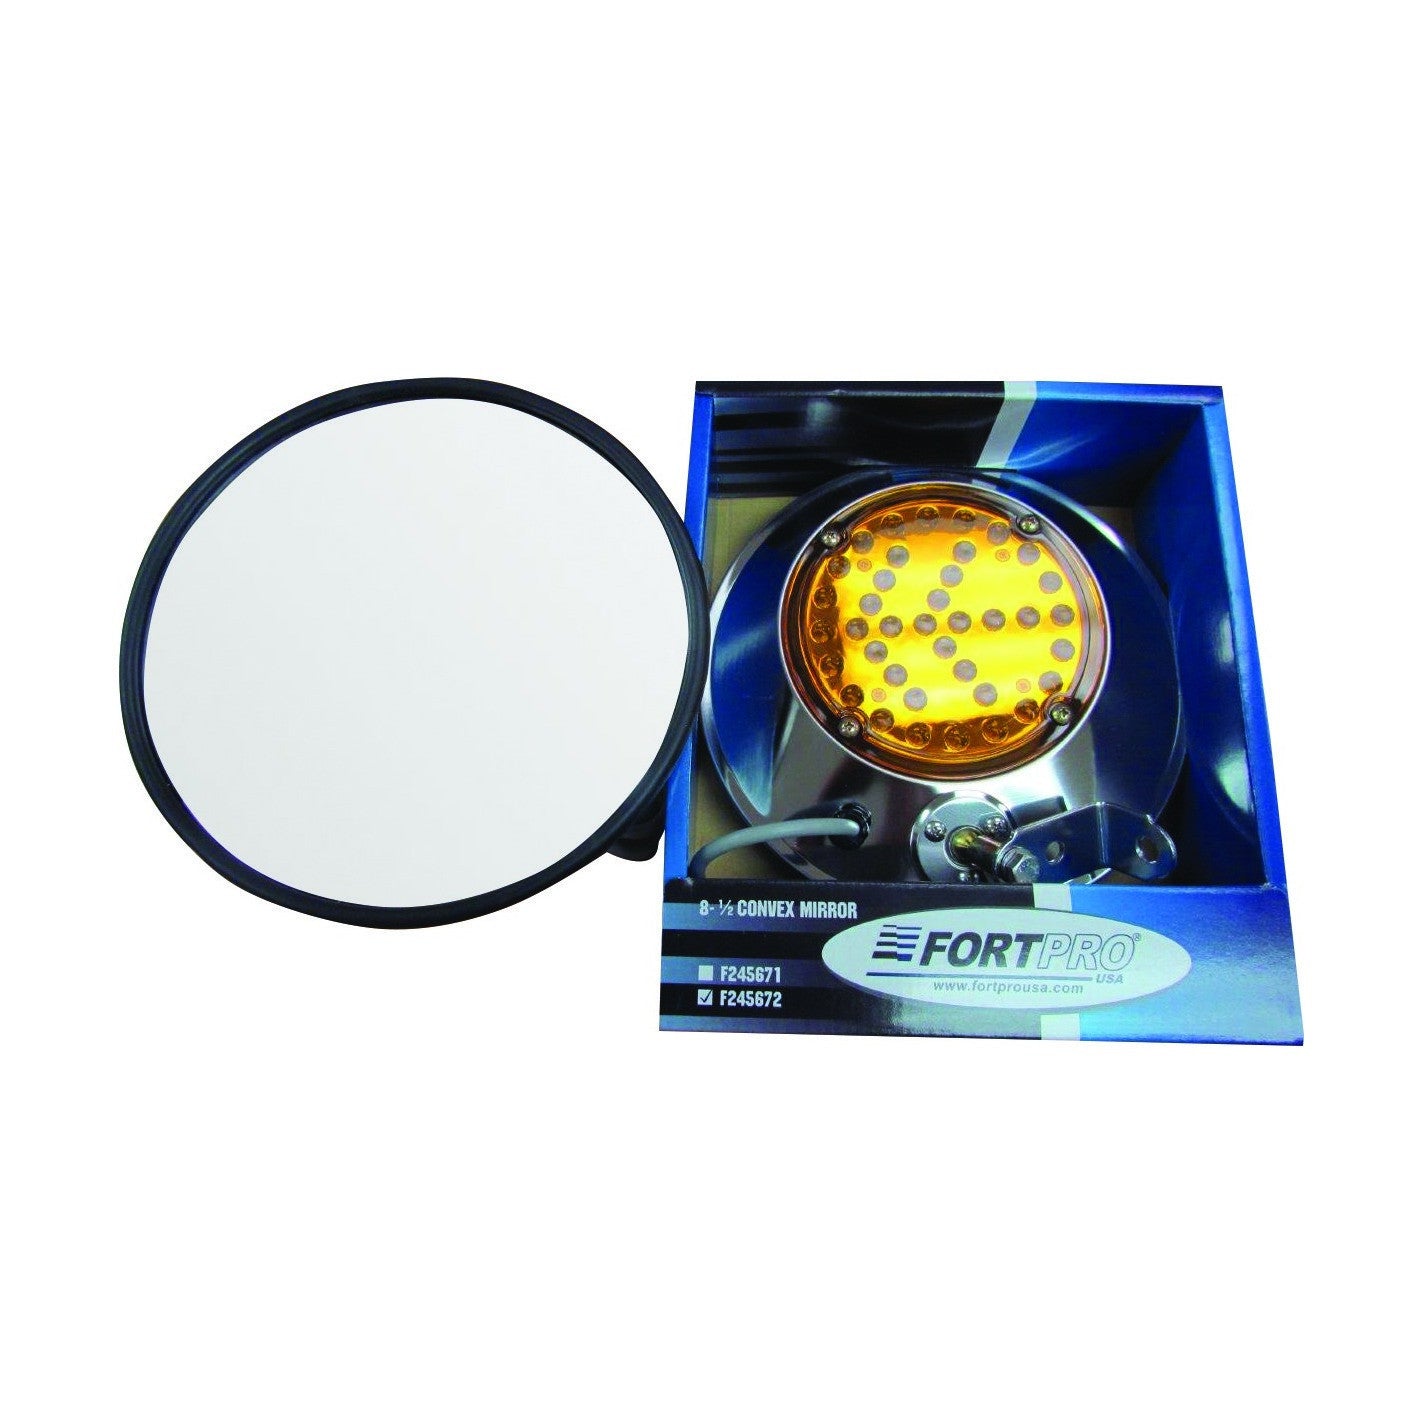 Fortpro 8 1/2" Convex Mirror Stainless Steel with LED Turn Signal